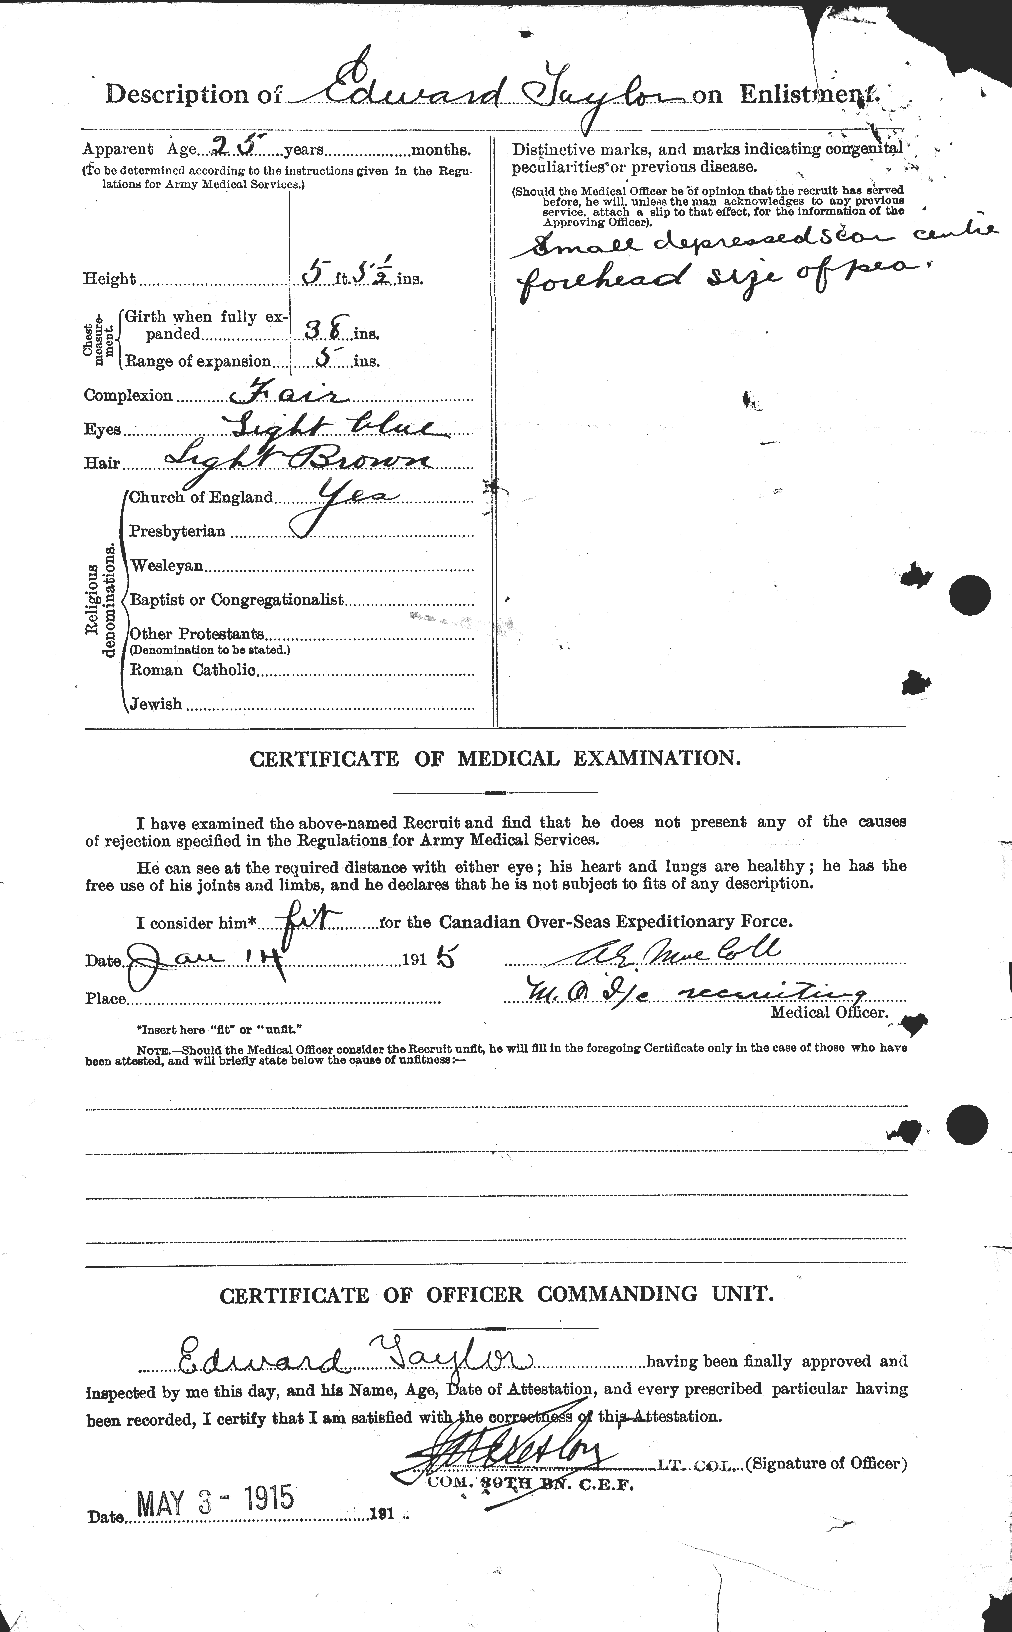 Personnel Records of the First World War - CEF 627296b